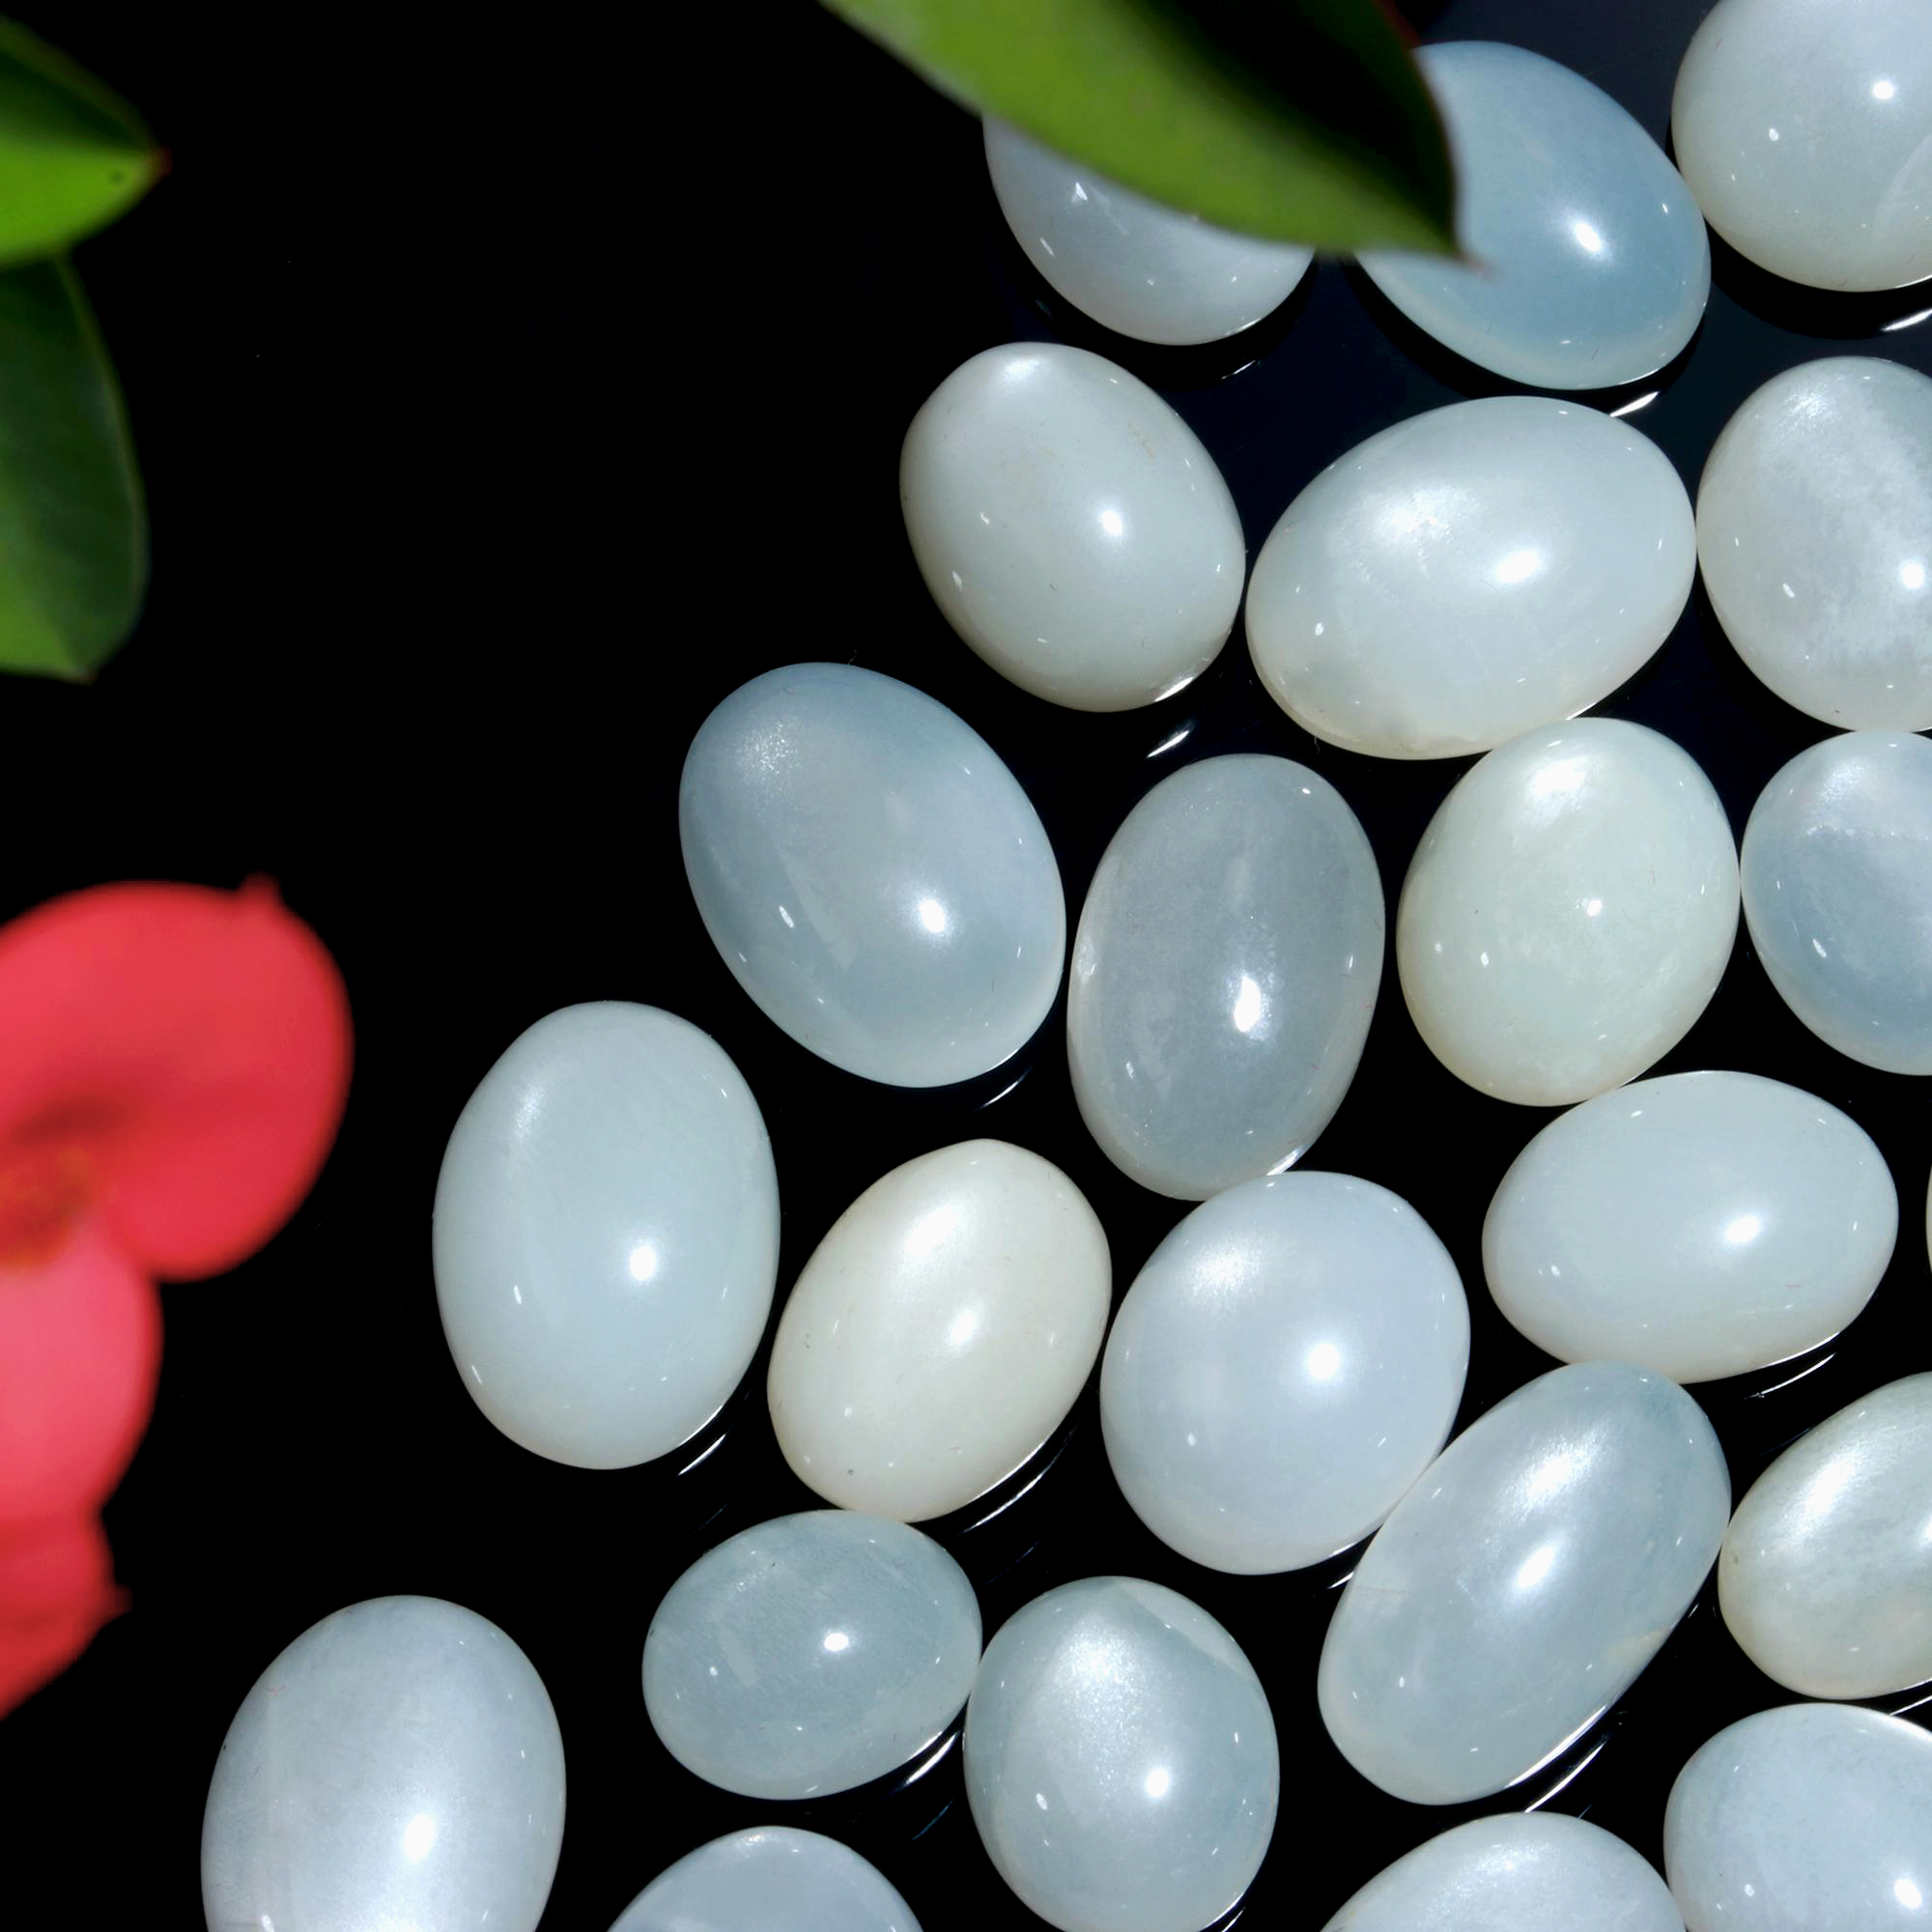 35 Pcs. 154Cts. Natural White Rainbow Moonstone polished Mix Cabochon Wholesale Loose Lot Size 15x9 10x7mm Gemstone for jewelry